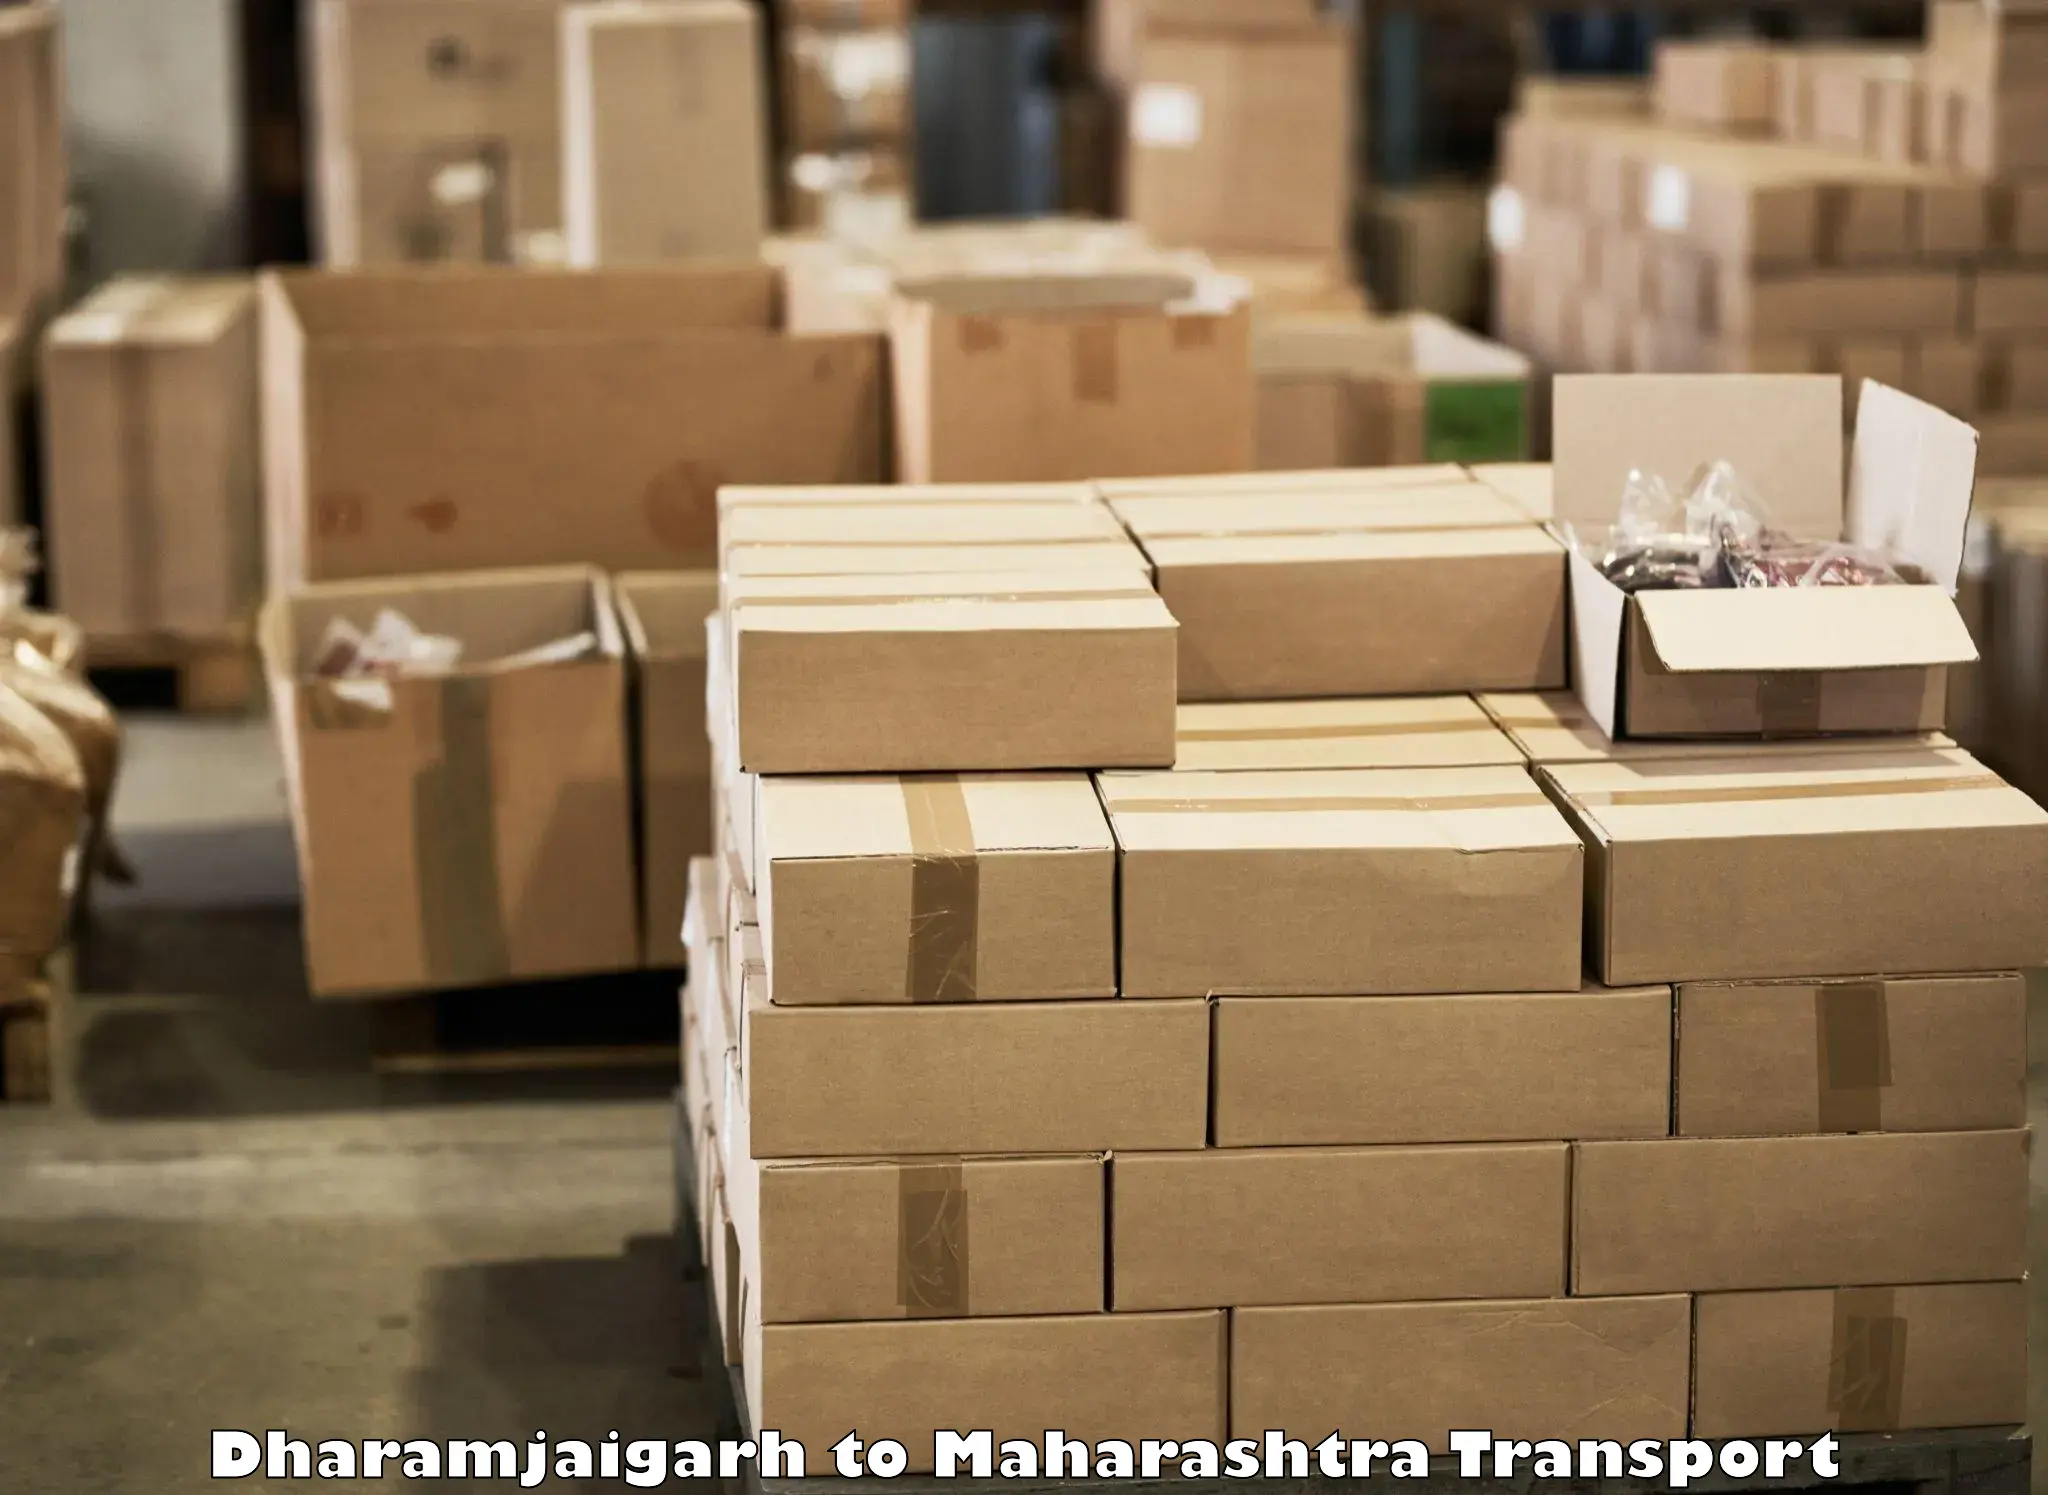 Container transport service Dharamjaigarh to Bhandara